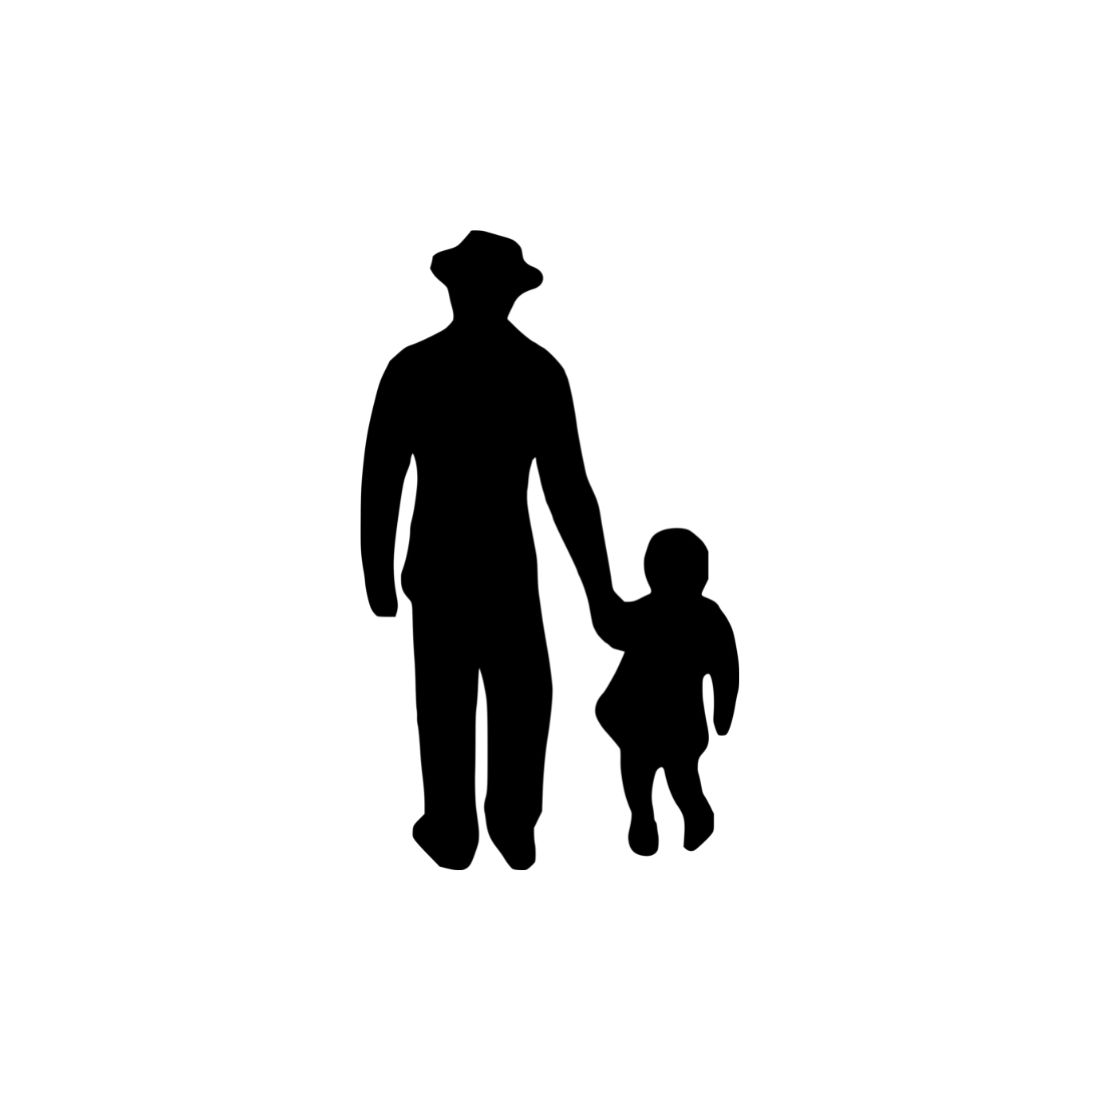 Family Silhouette Bundles, father and daughter.